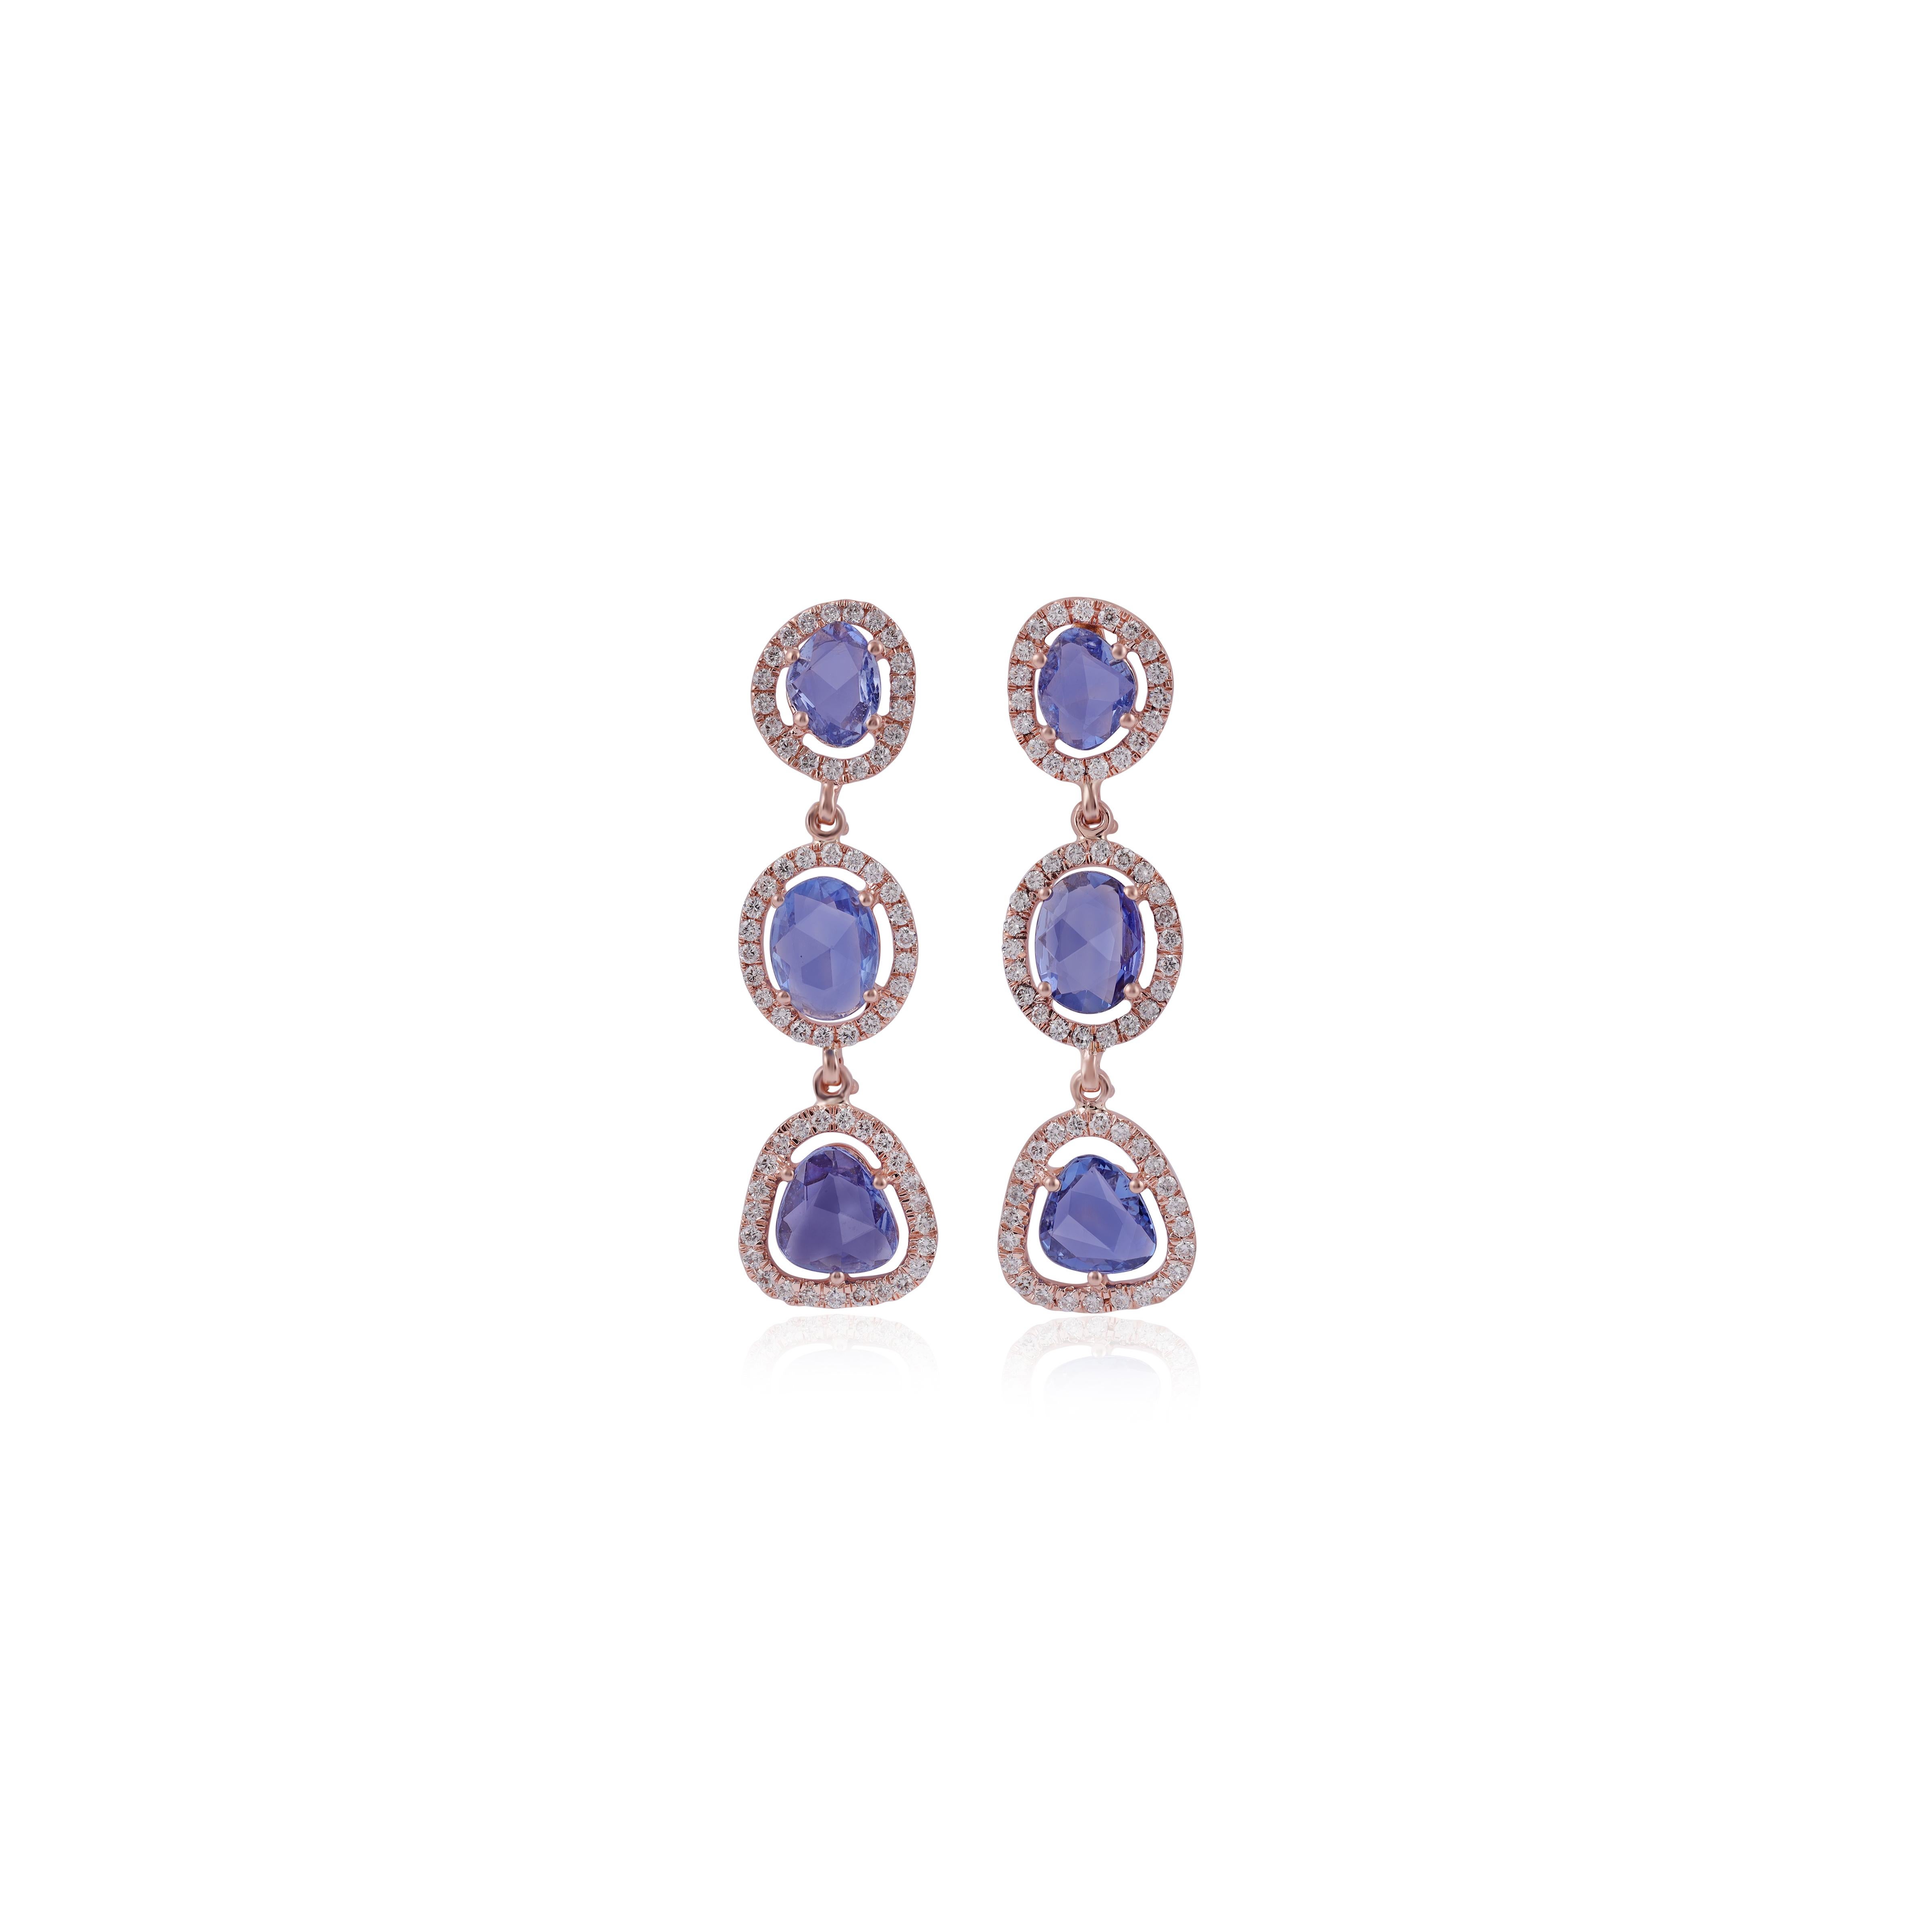 These are an exclusive earrings with Blue sapphire & diamonds features 6 pieces of Sapphire weight 5.41 carats, surrounded with 130 pieces of round brilliant cut of diamonds weight 0.90 carats, These entire earrings are studded in 18k rose gold